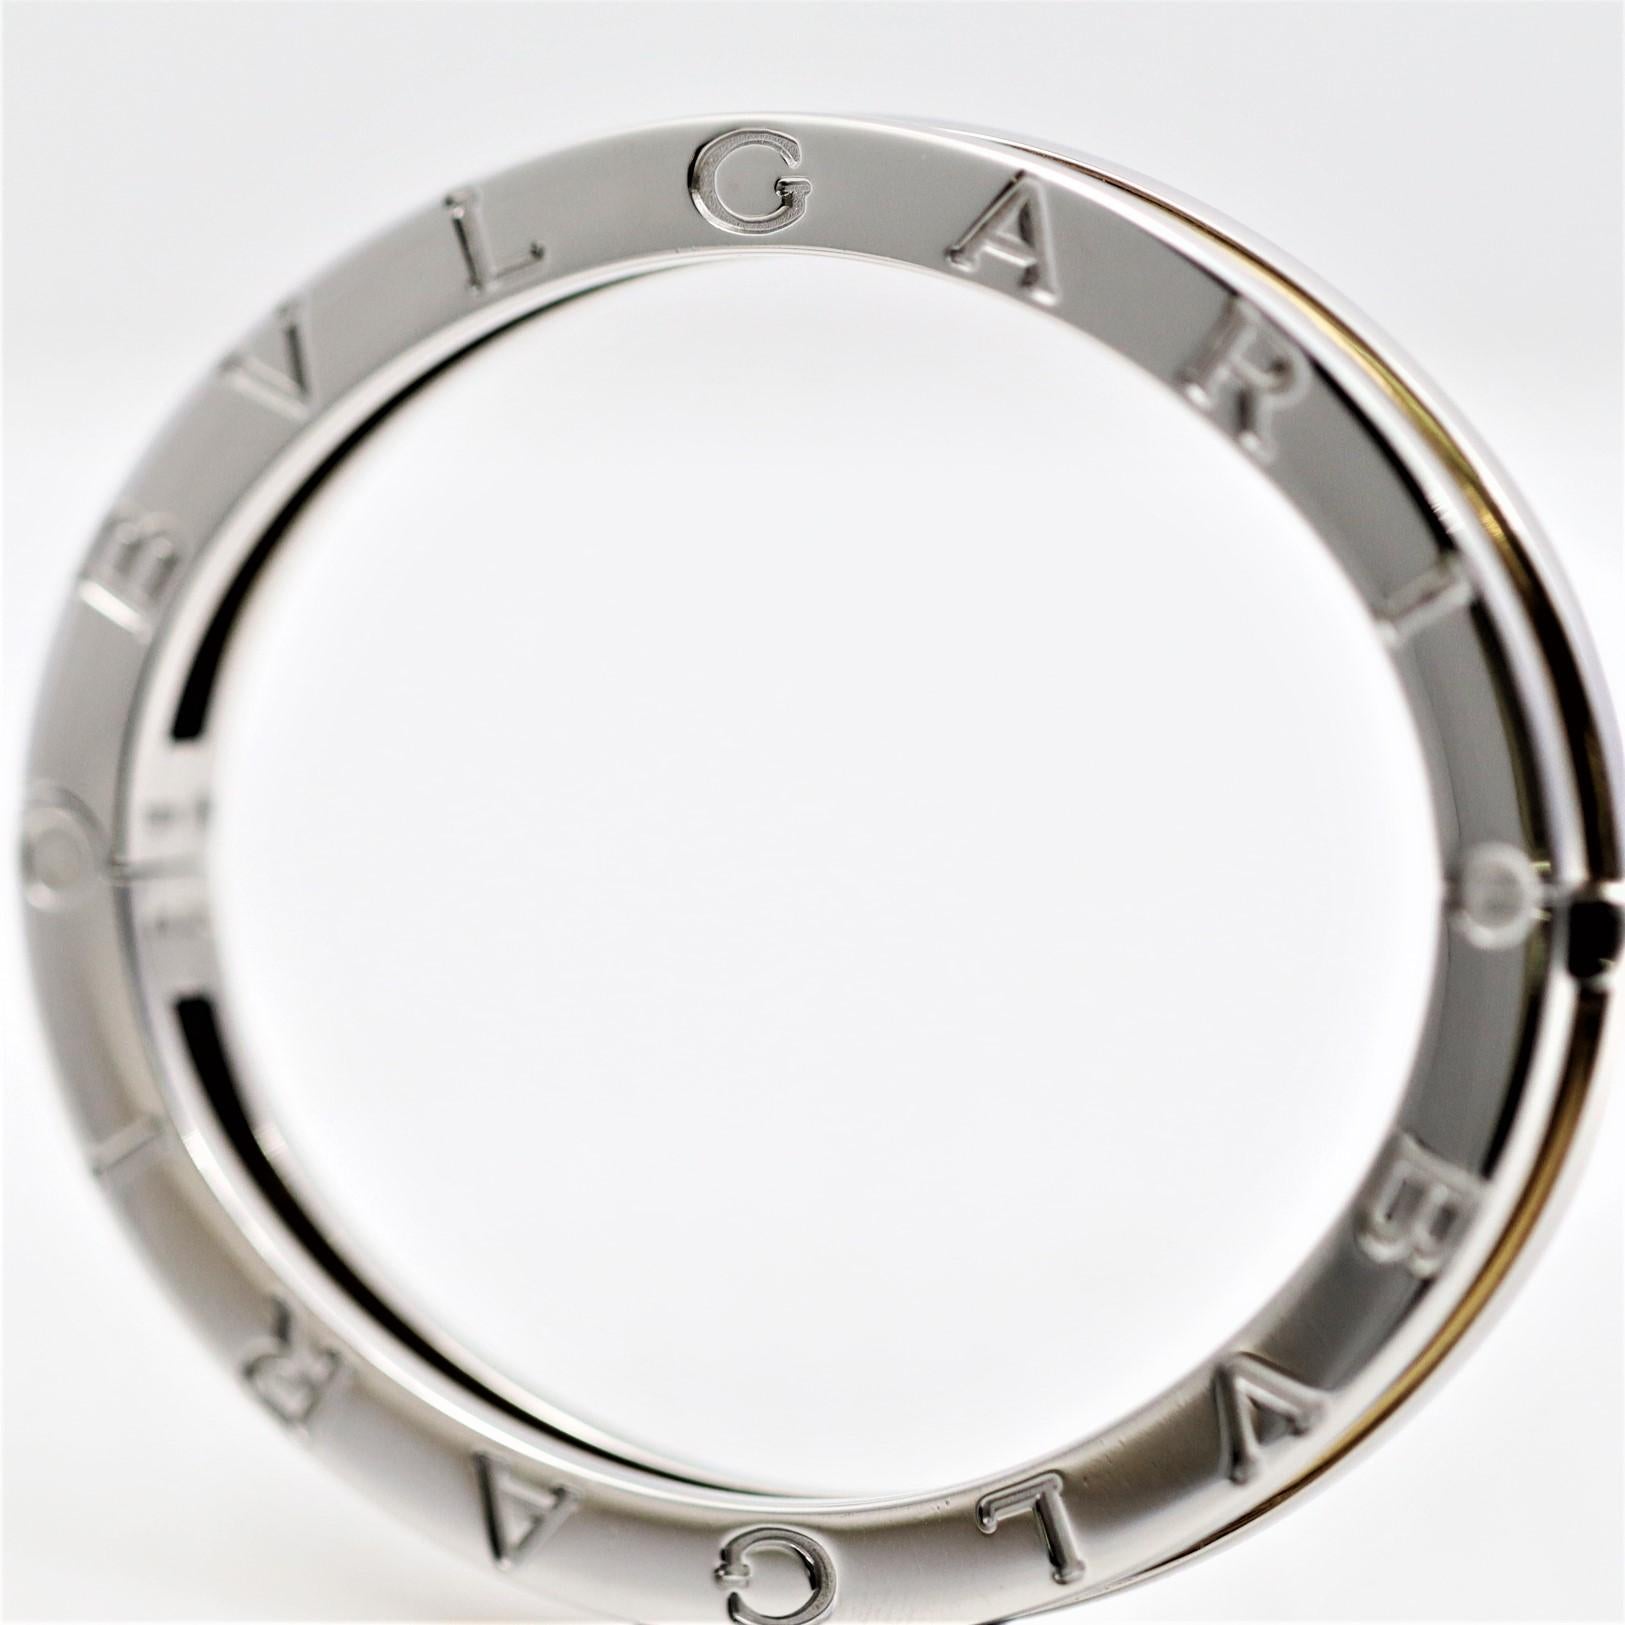 A simple and stylish bangle bracelet by famed Italian jewelry house Bvlgari. It is made of both stainless steel and 18k yellow gold for a luxurious two-toned look. Adding to the bracelet is the word Bvlgari written in large letters around the